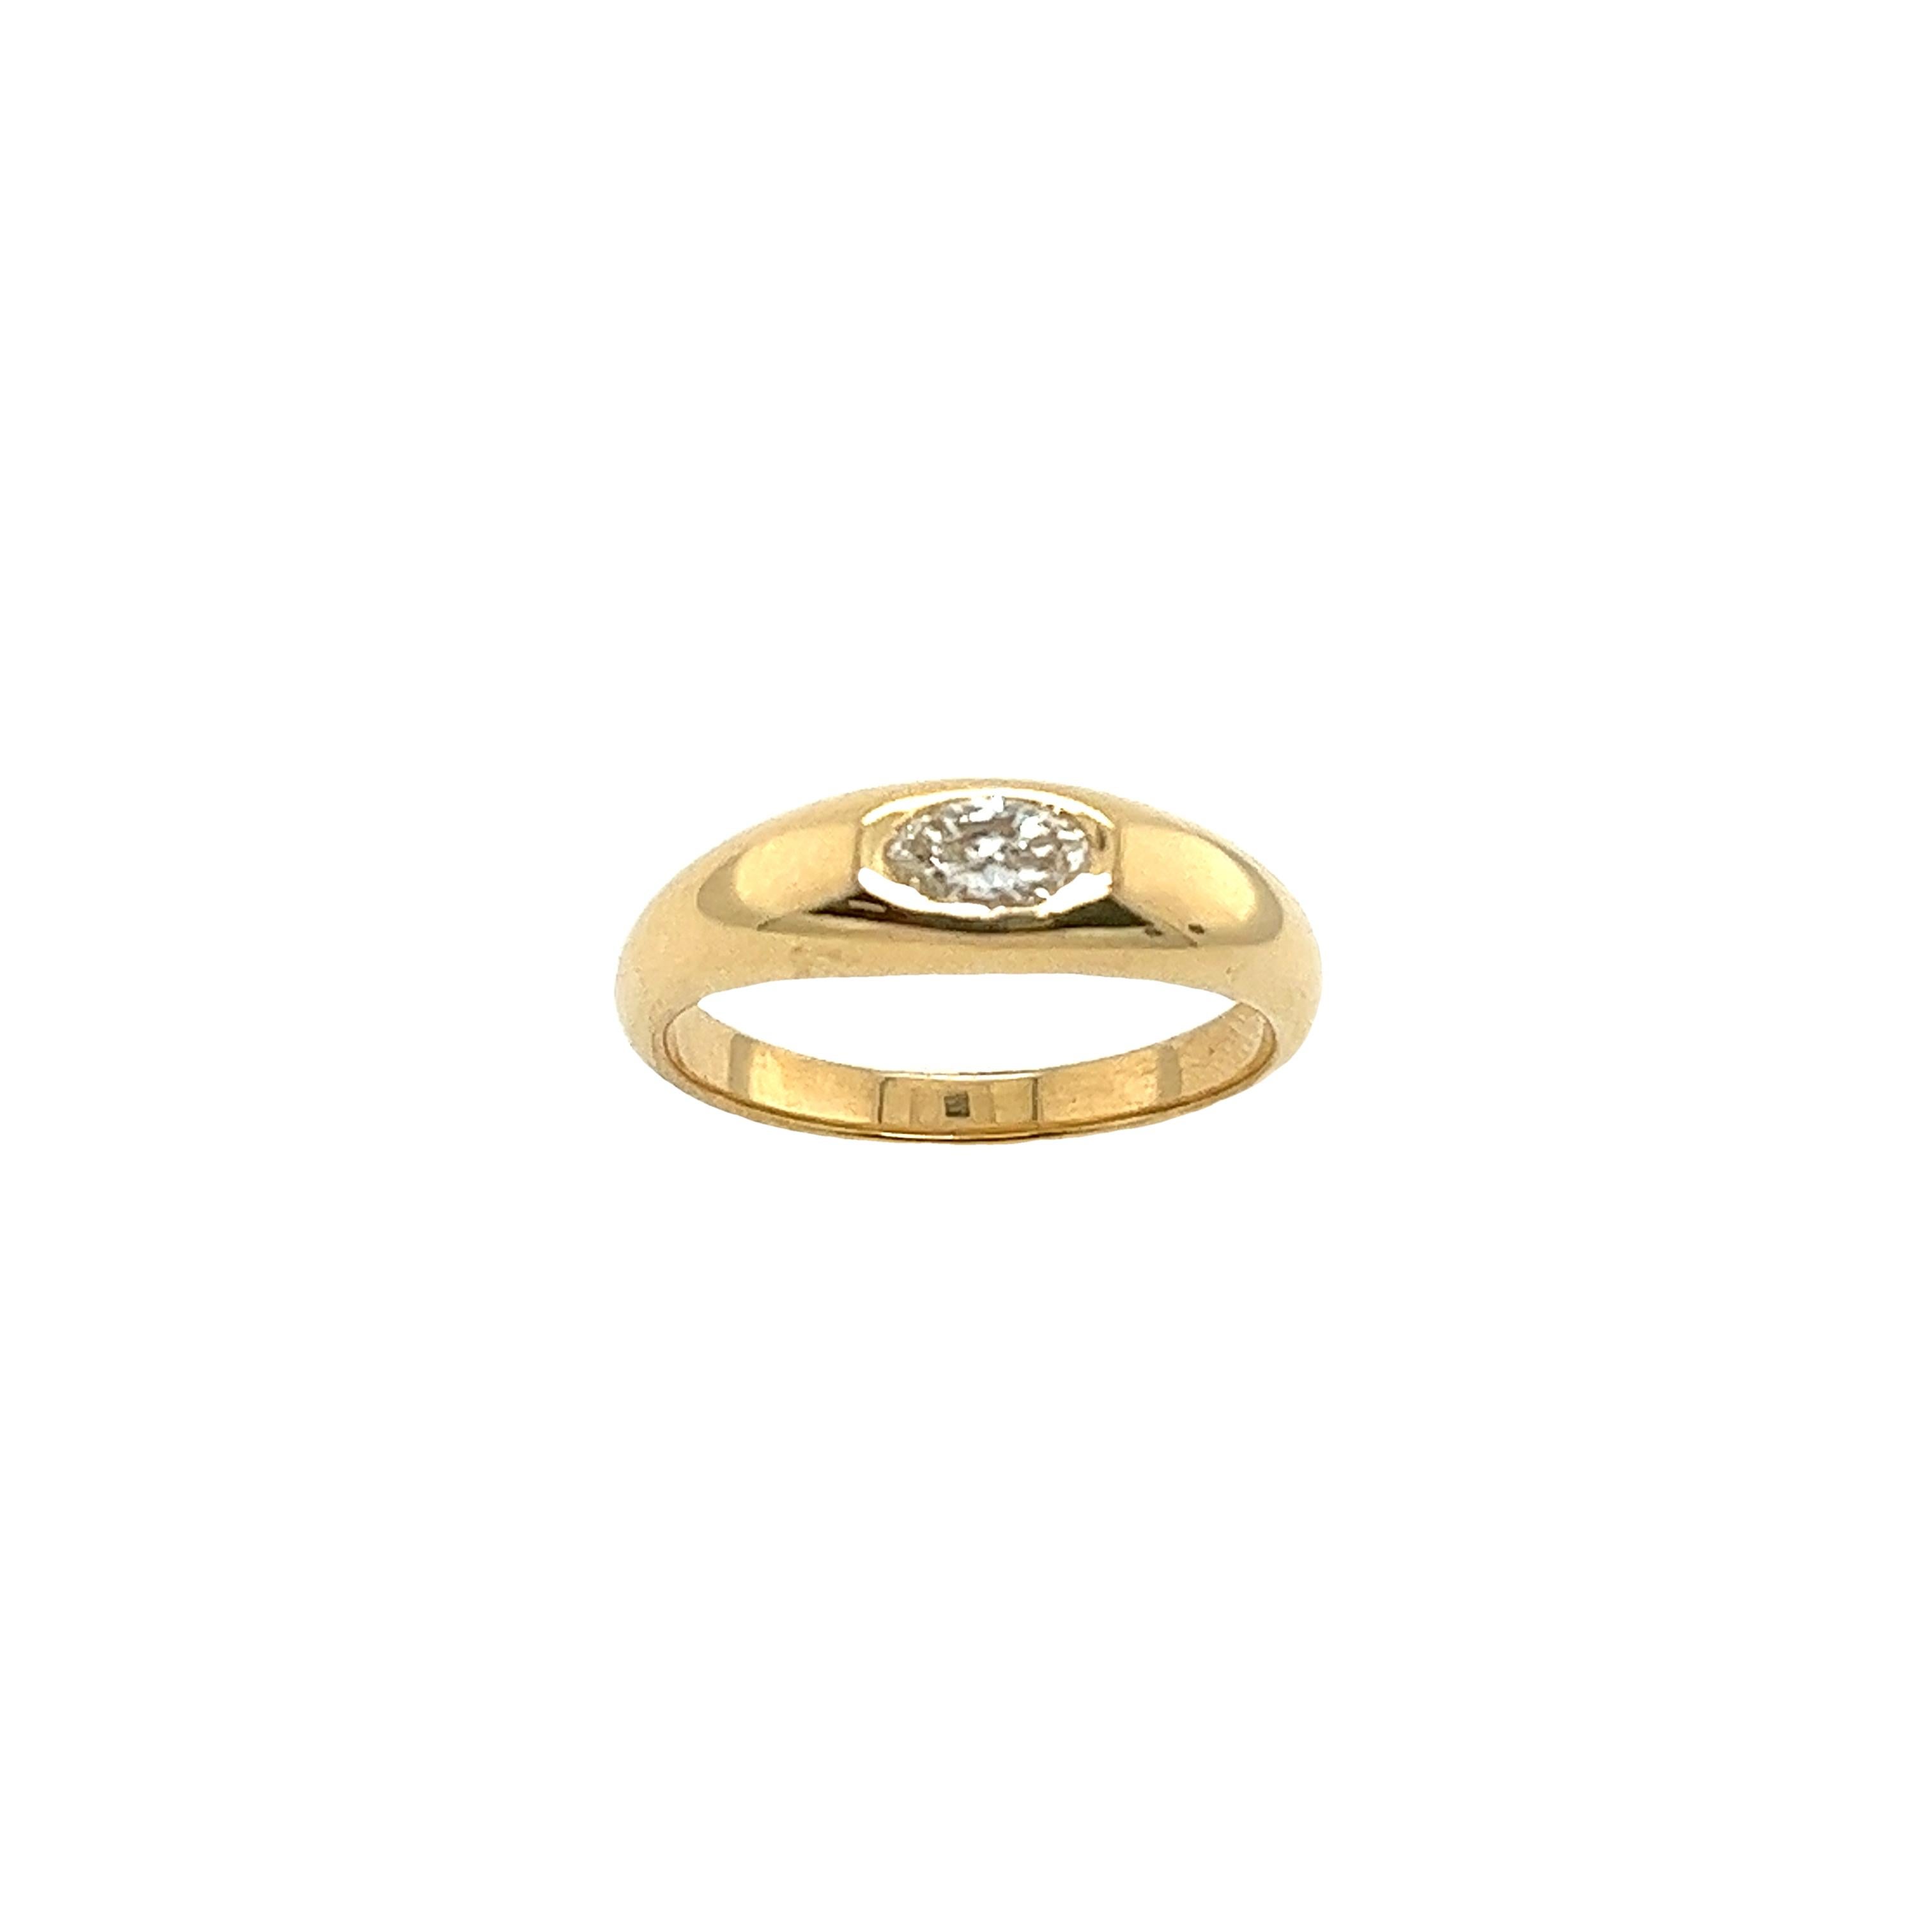 18ct Yellow Gold Diamond Ring, Set With 0.30ct Natural Oval Diamond G-H/VS For Sale 1